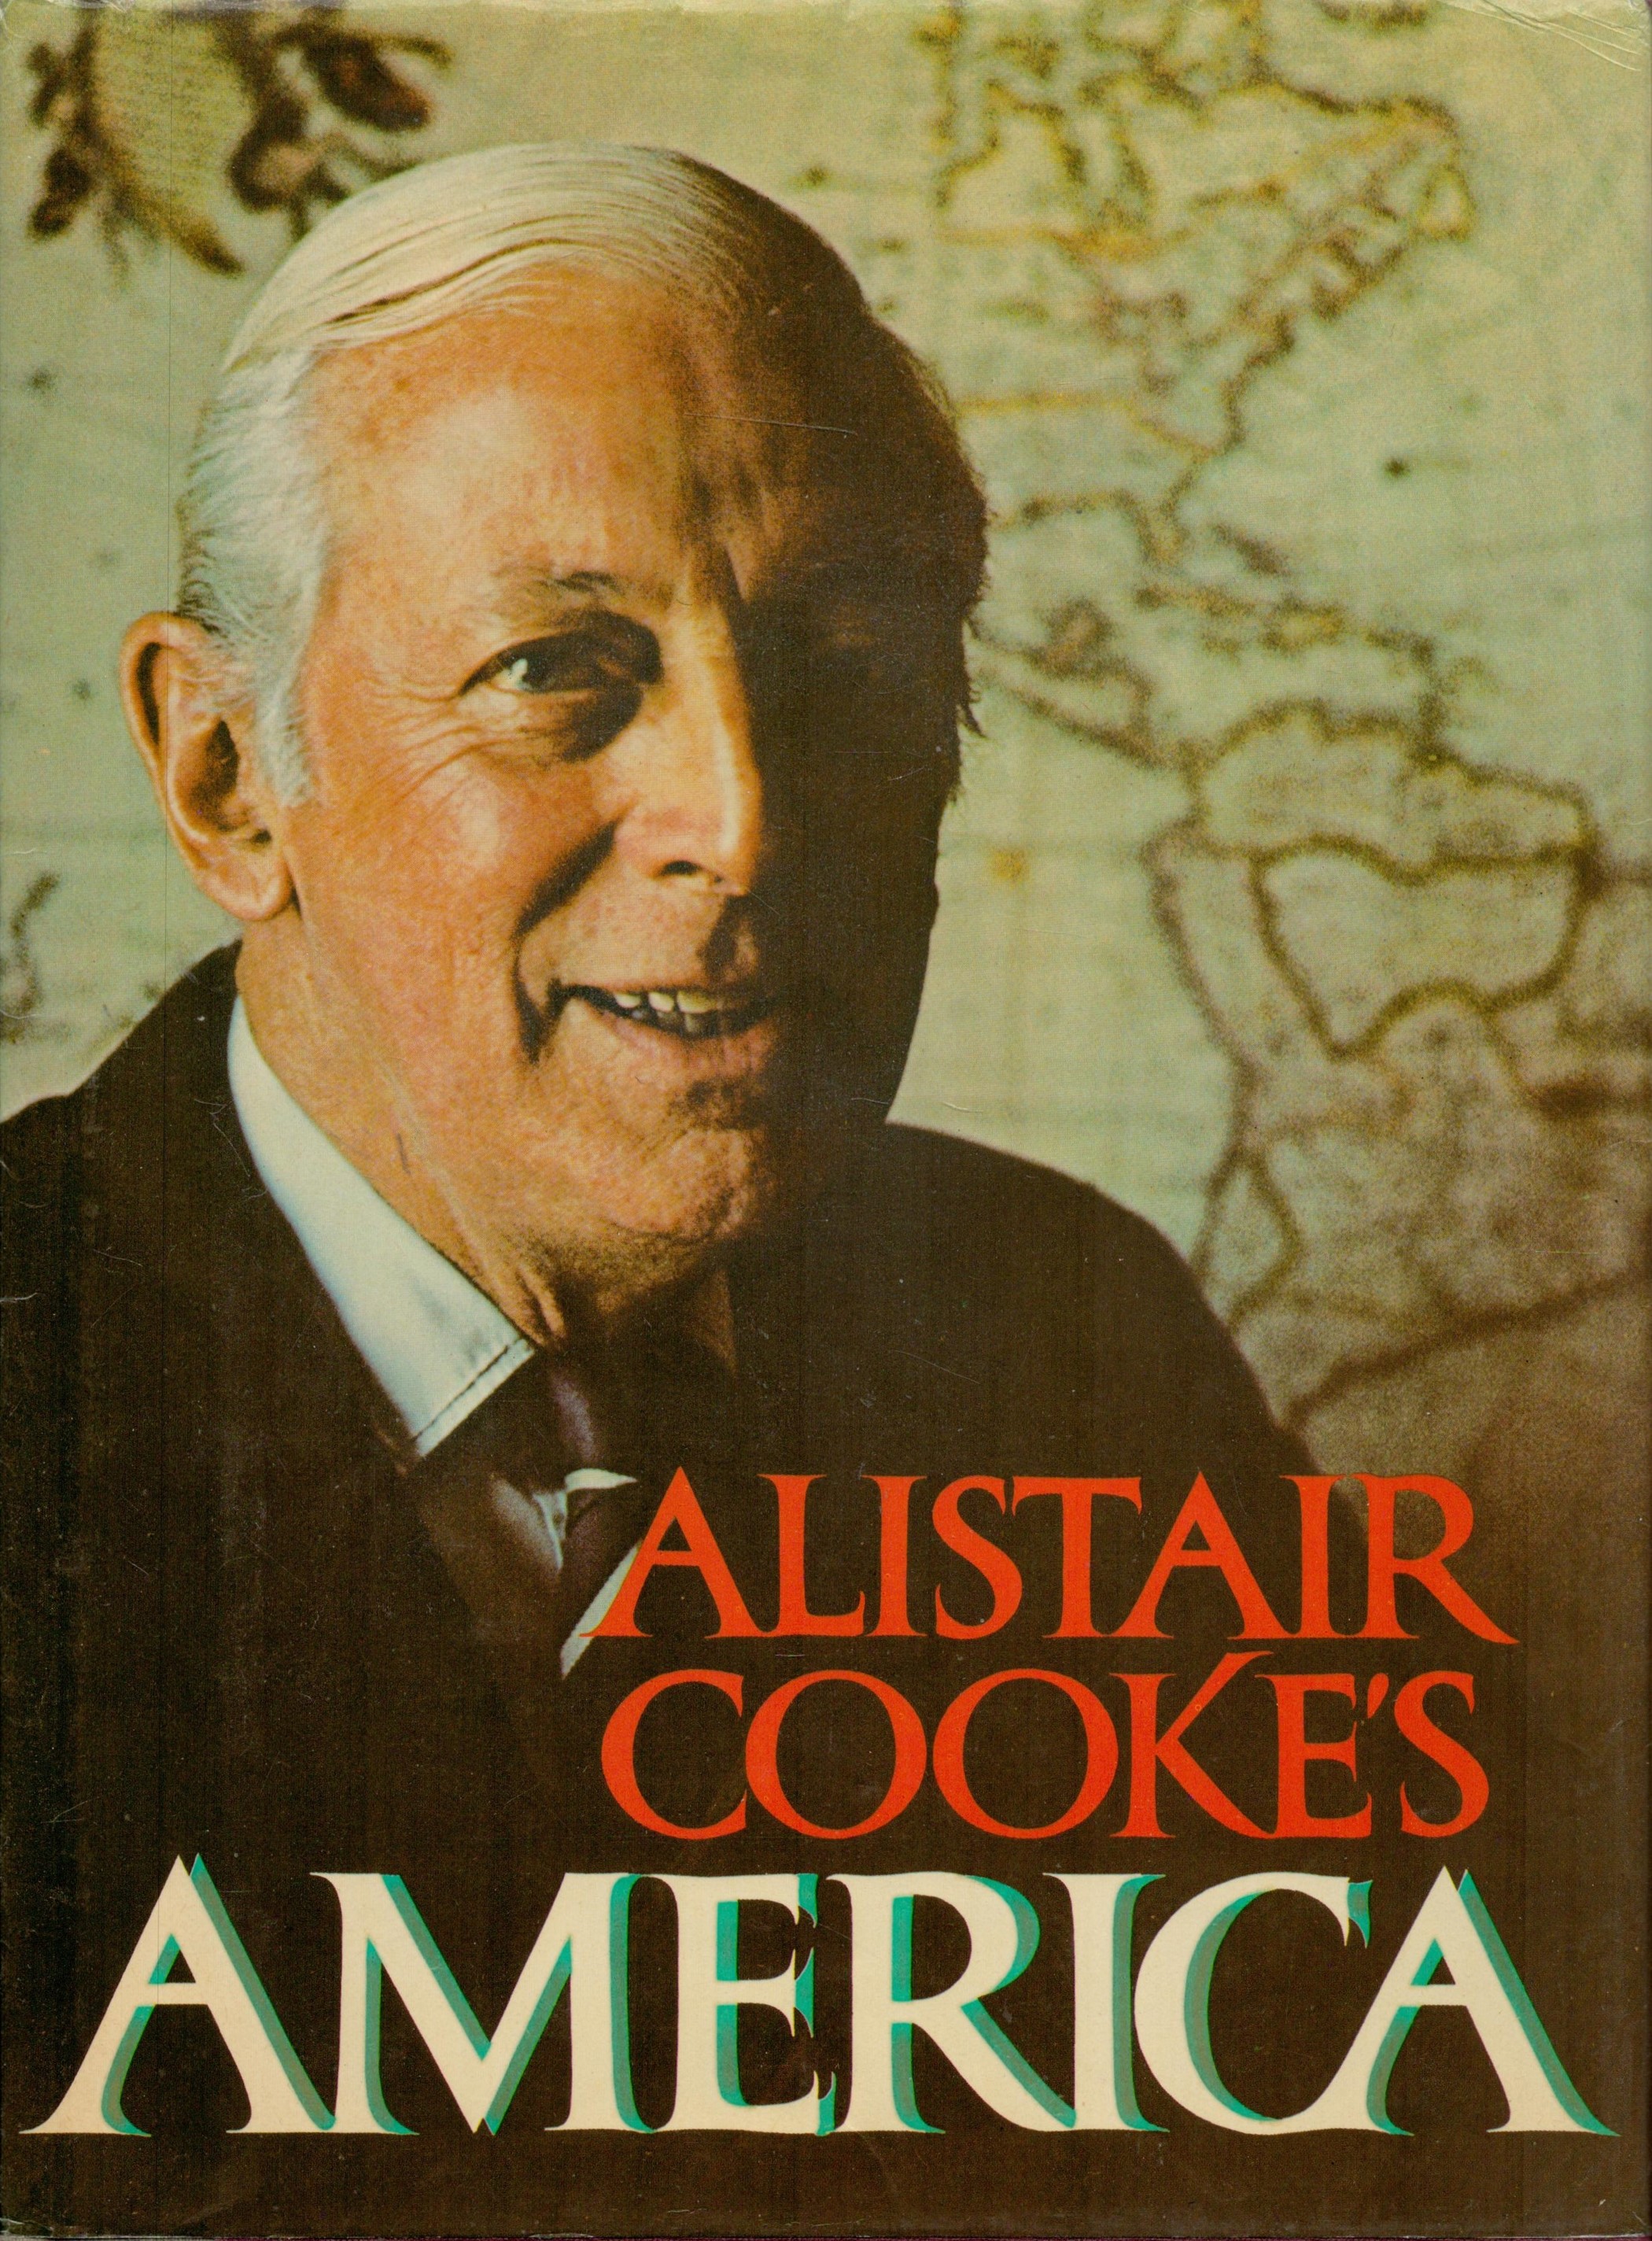 Alistair Cooke's America 1976 Fourth Edition Hardback Book with 400 pages Includes Service of